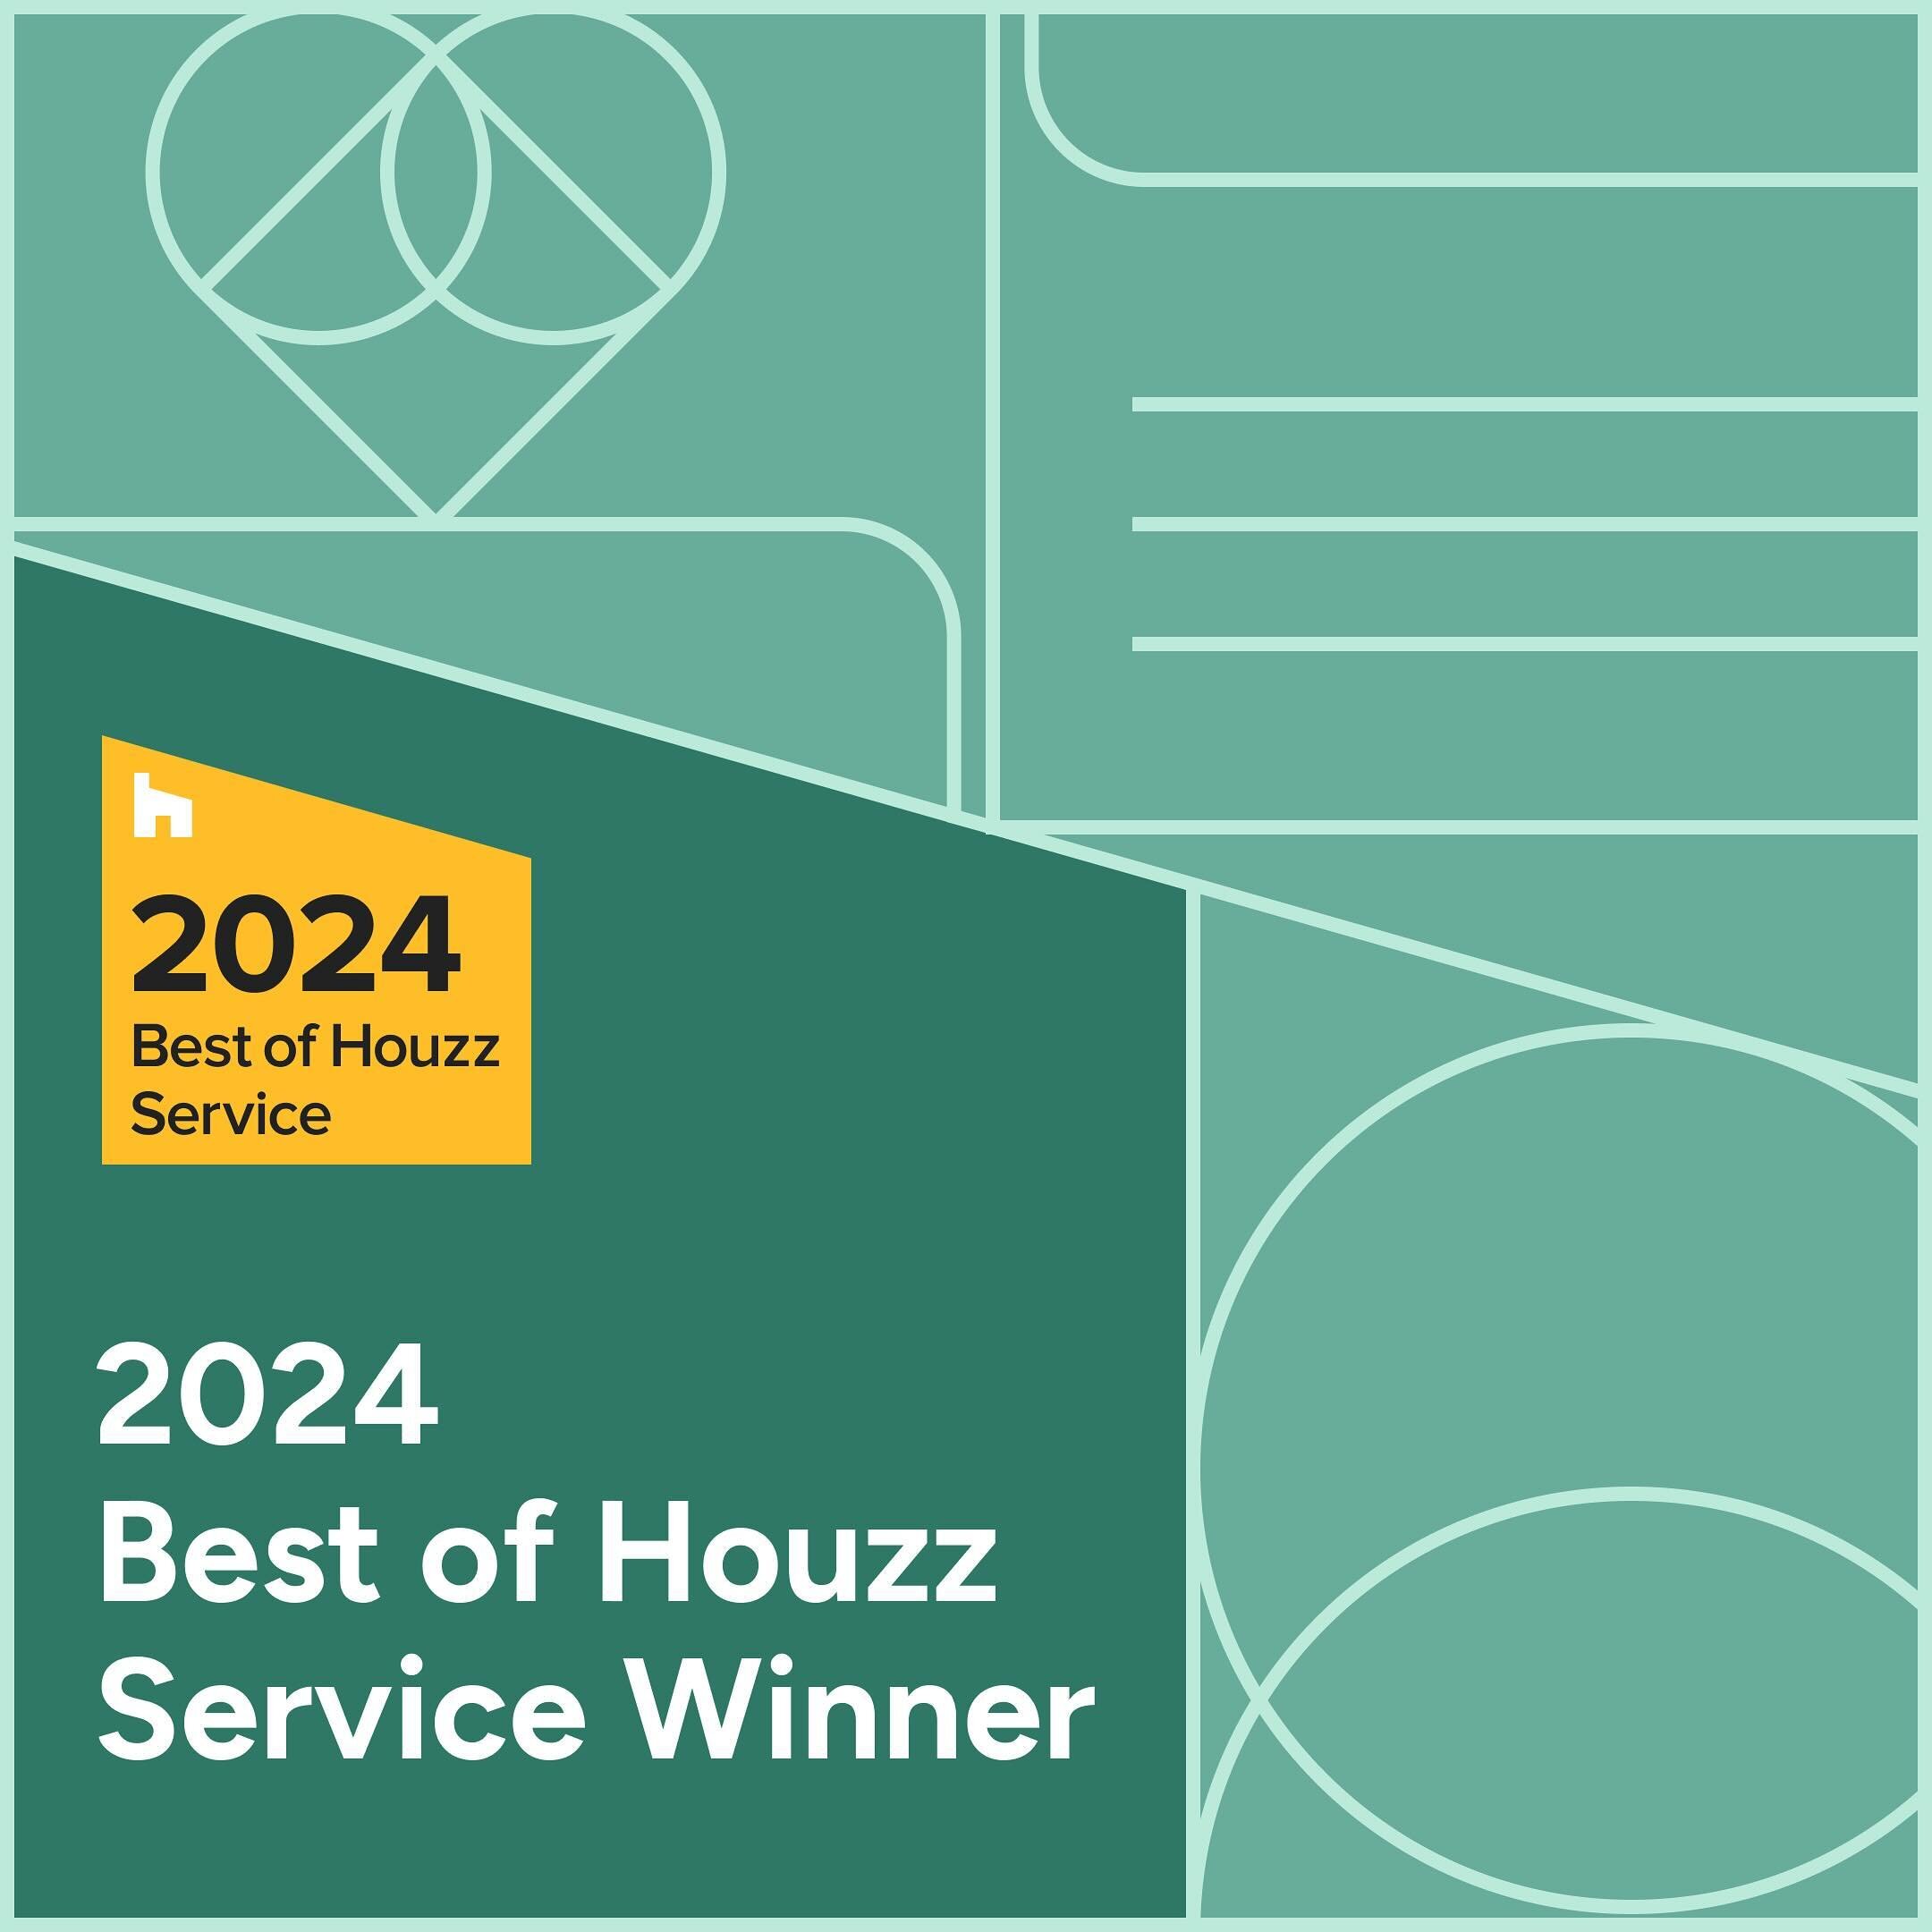 We&rsquo;re thrilled to share that Lange Custom Builders is a Best of Houzz 2024 winner! We&rsquo;re so proud of all this team has accomplished and honored to be recognized for our work. @houzz